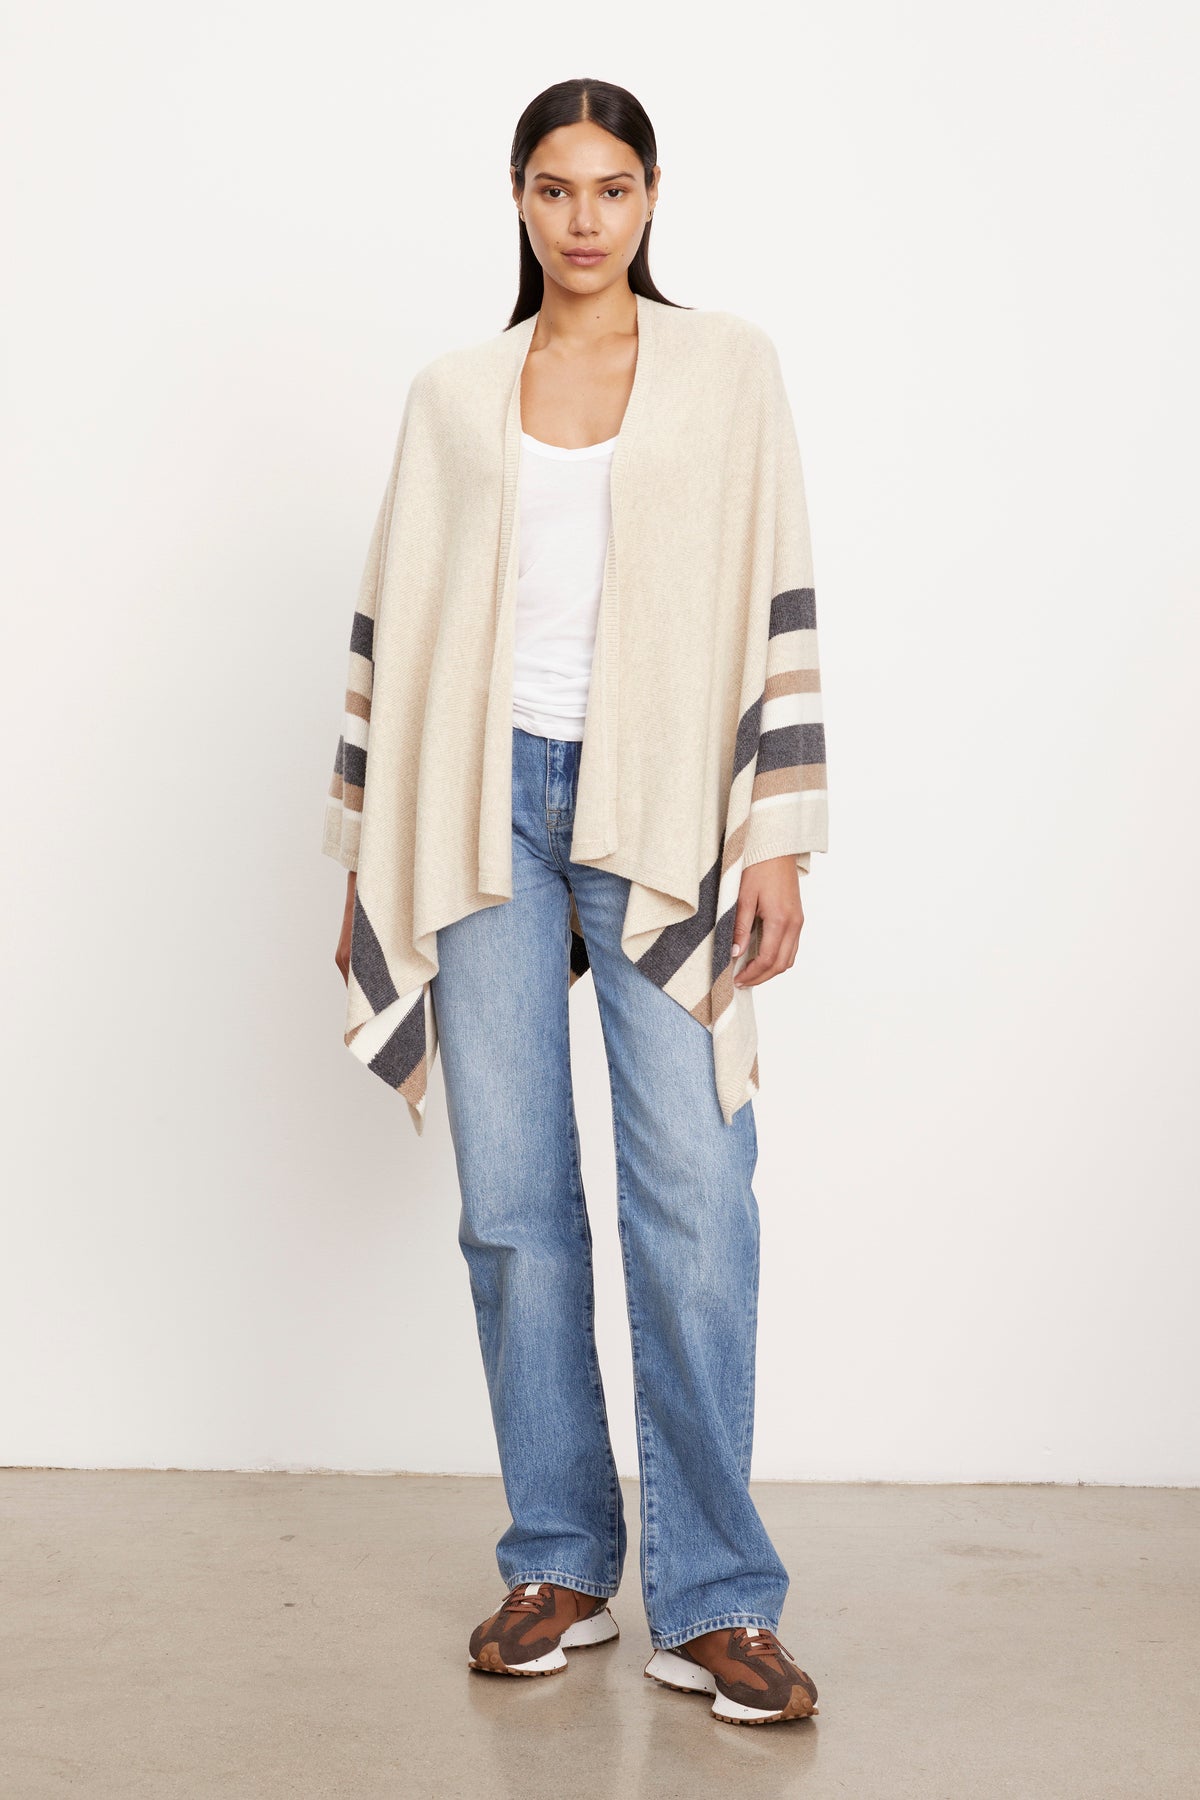 The model is wearing jeans and a Velvet by Graham & Spencer HARPER OPEN FRONT PONCHO.-26897792991425